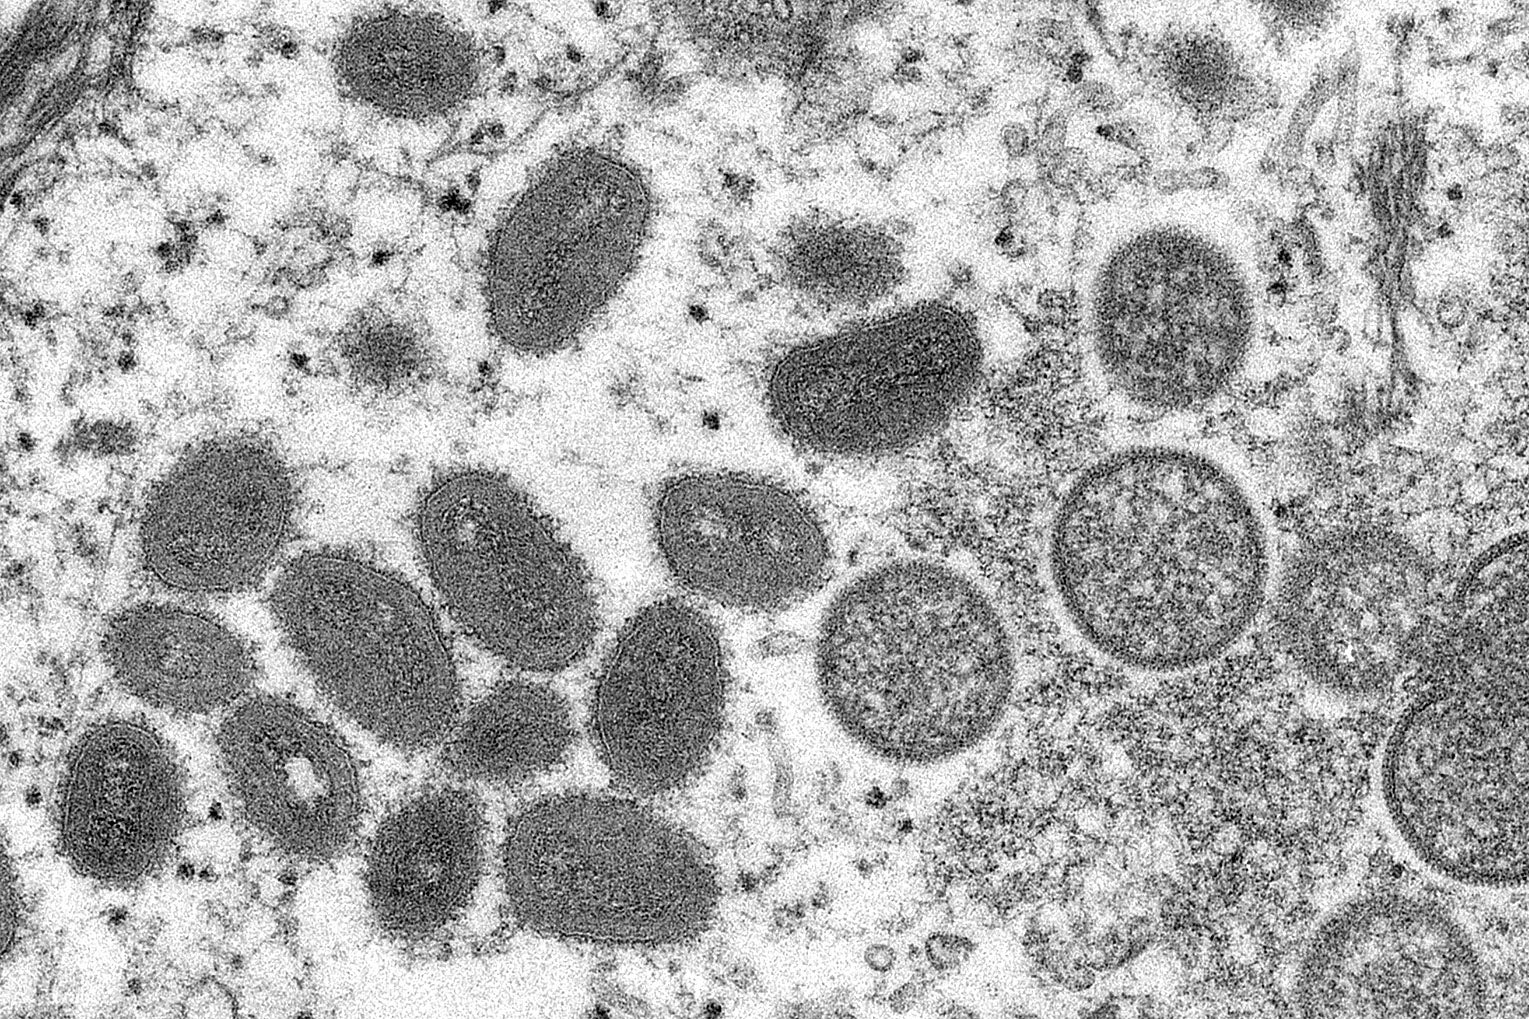 An electron microscopic image shows mature, oval-shaped monkeypox virus particles.